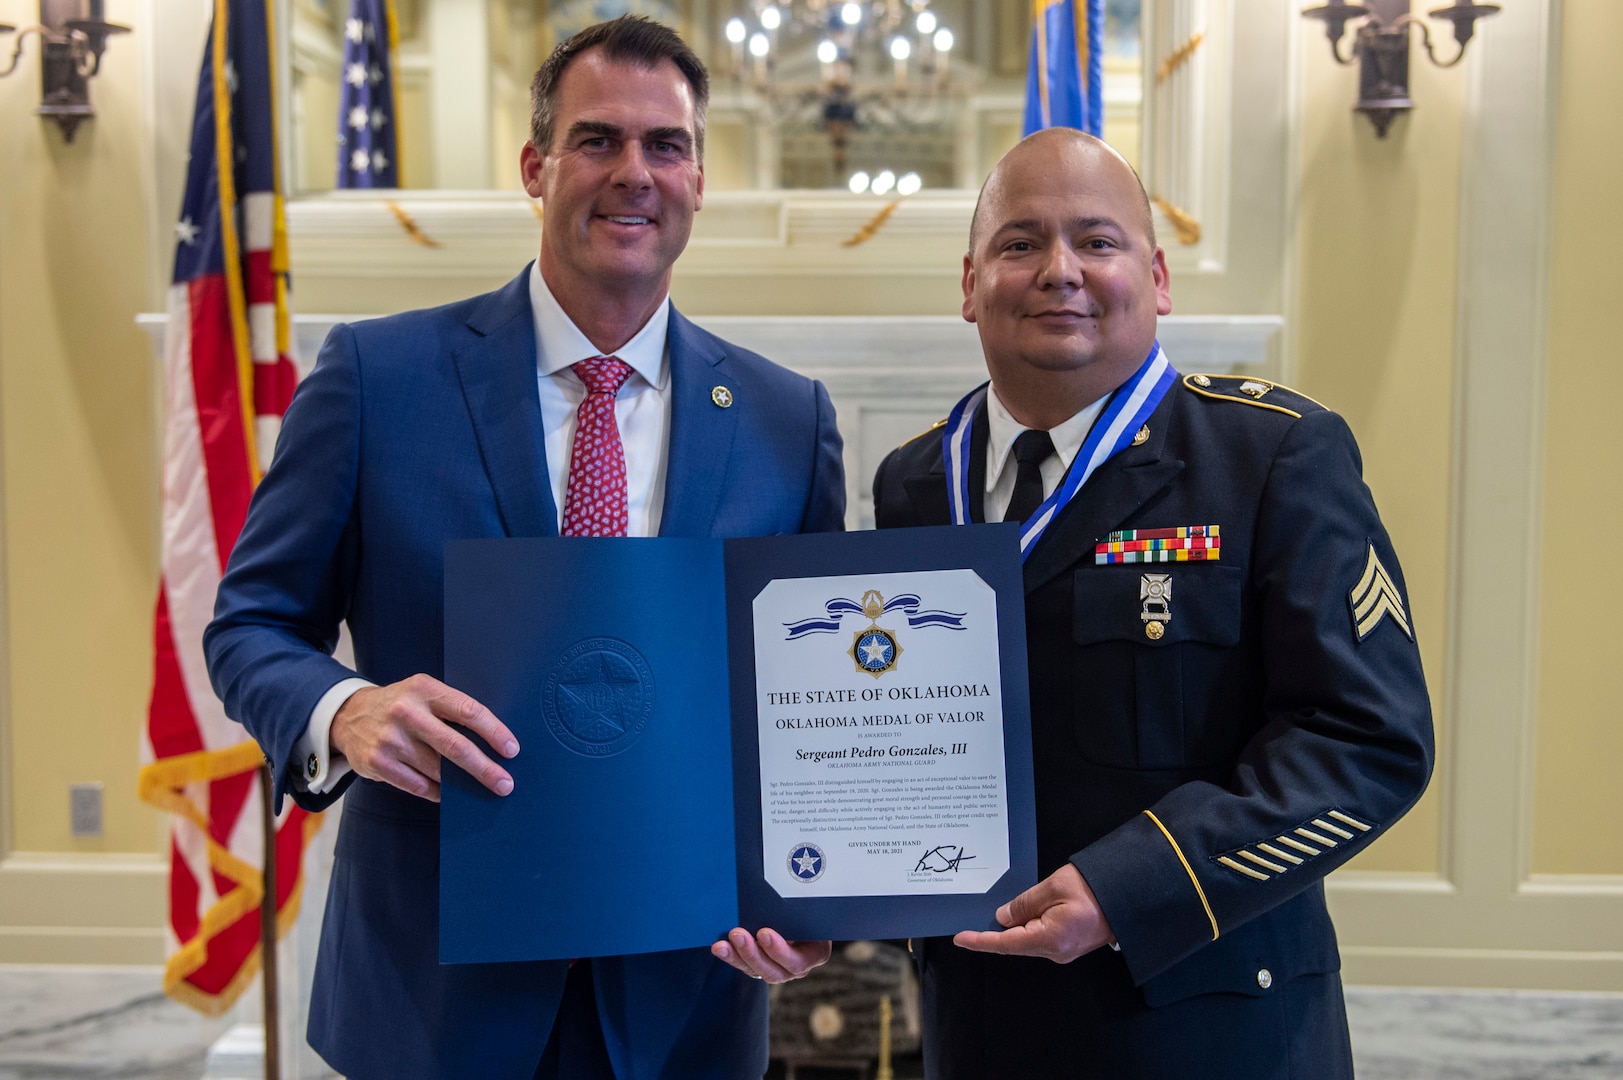 Kevin J. Stitt, governor of Oklahoma, poses with Oklahoma Army National Guard Sgt. Pedro Gonzales III after presenting him with the Oklahoma Medal of Valor during a ceremony at the Oklahoma State Capitol in Oklahoma City, May 18, 2021. The Oklahoma Medal of Valor is the state of Oklahoma’s highest award of honor presented to a member of a public safety agency or member of the public. (Oklahoma National Guard photo by Anthony Jones)